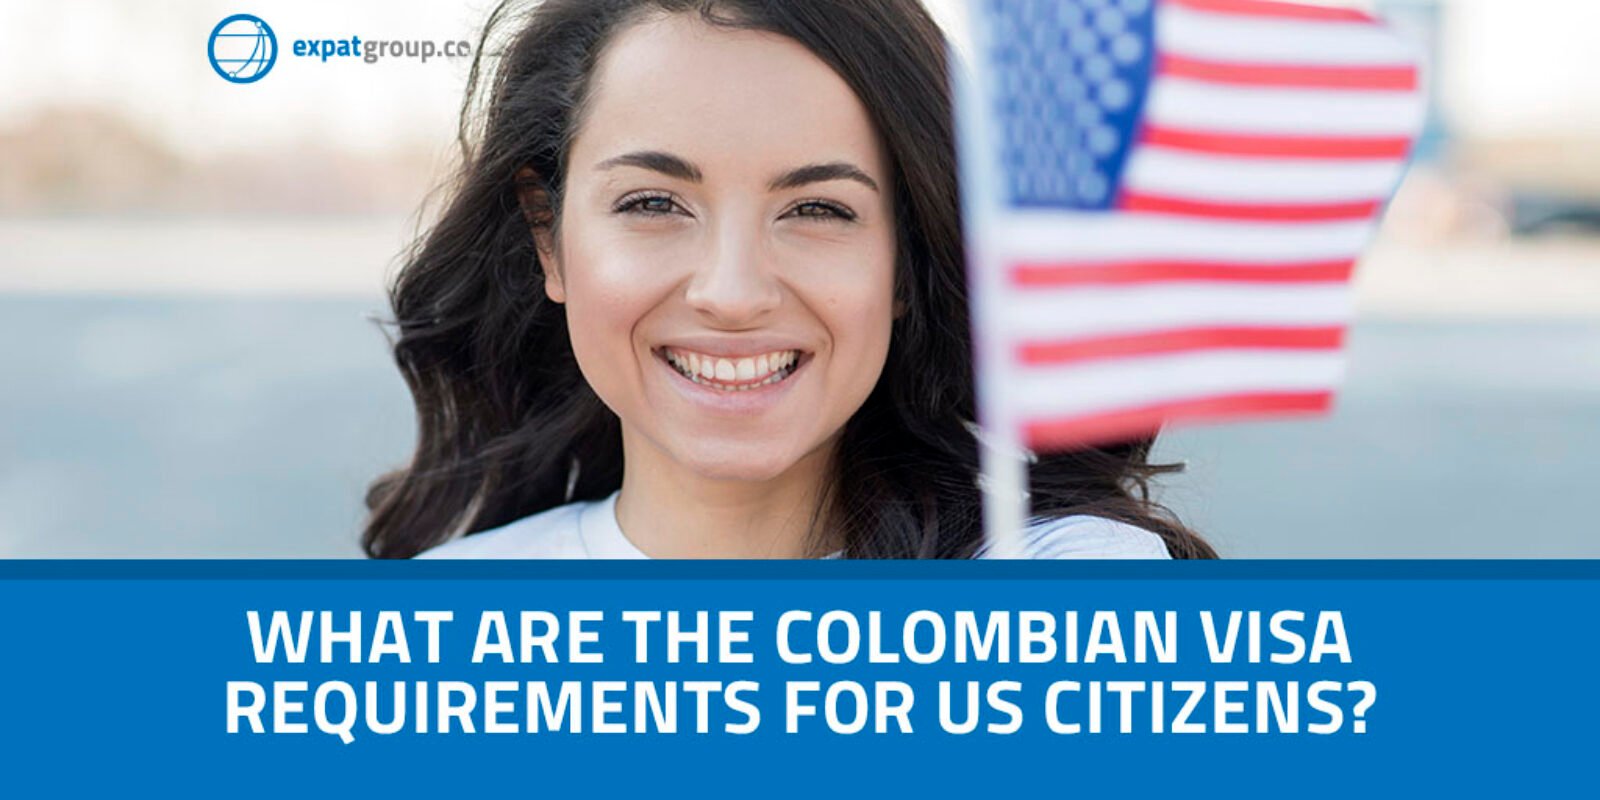 What Are the Colombian Visa Requirements for US Citizens